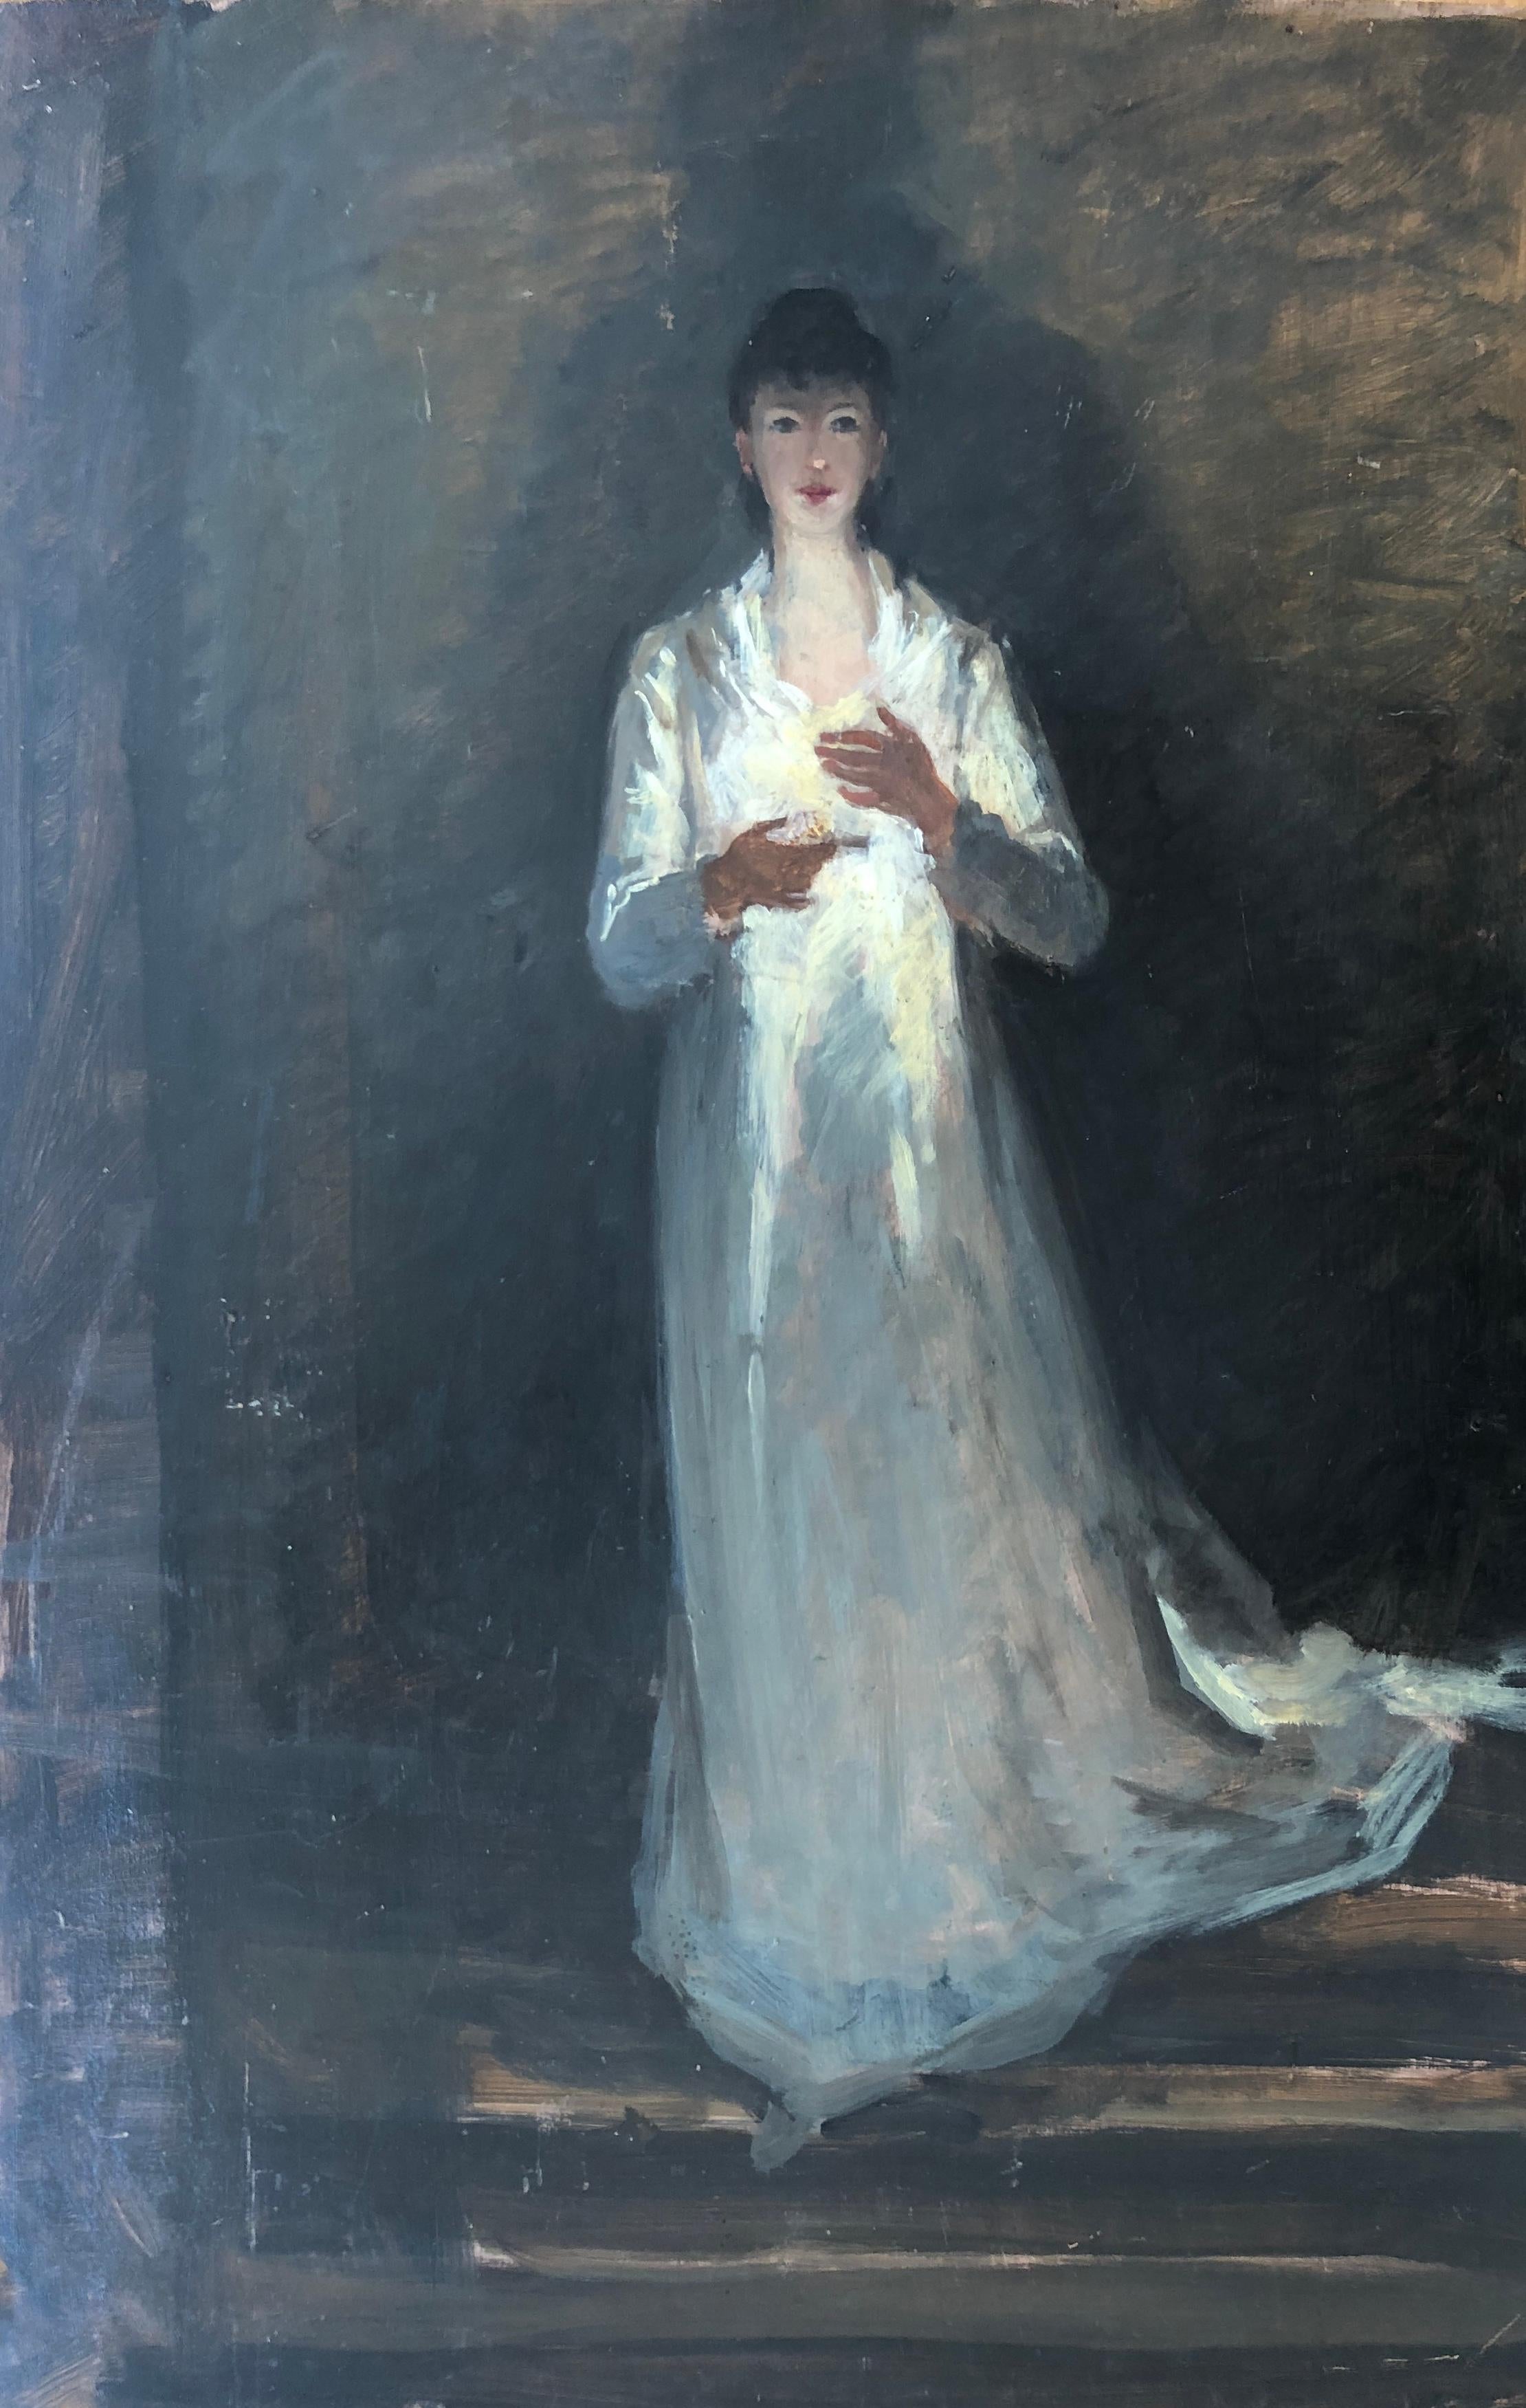 Study of a young woman at night lighting herself with a candle